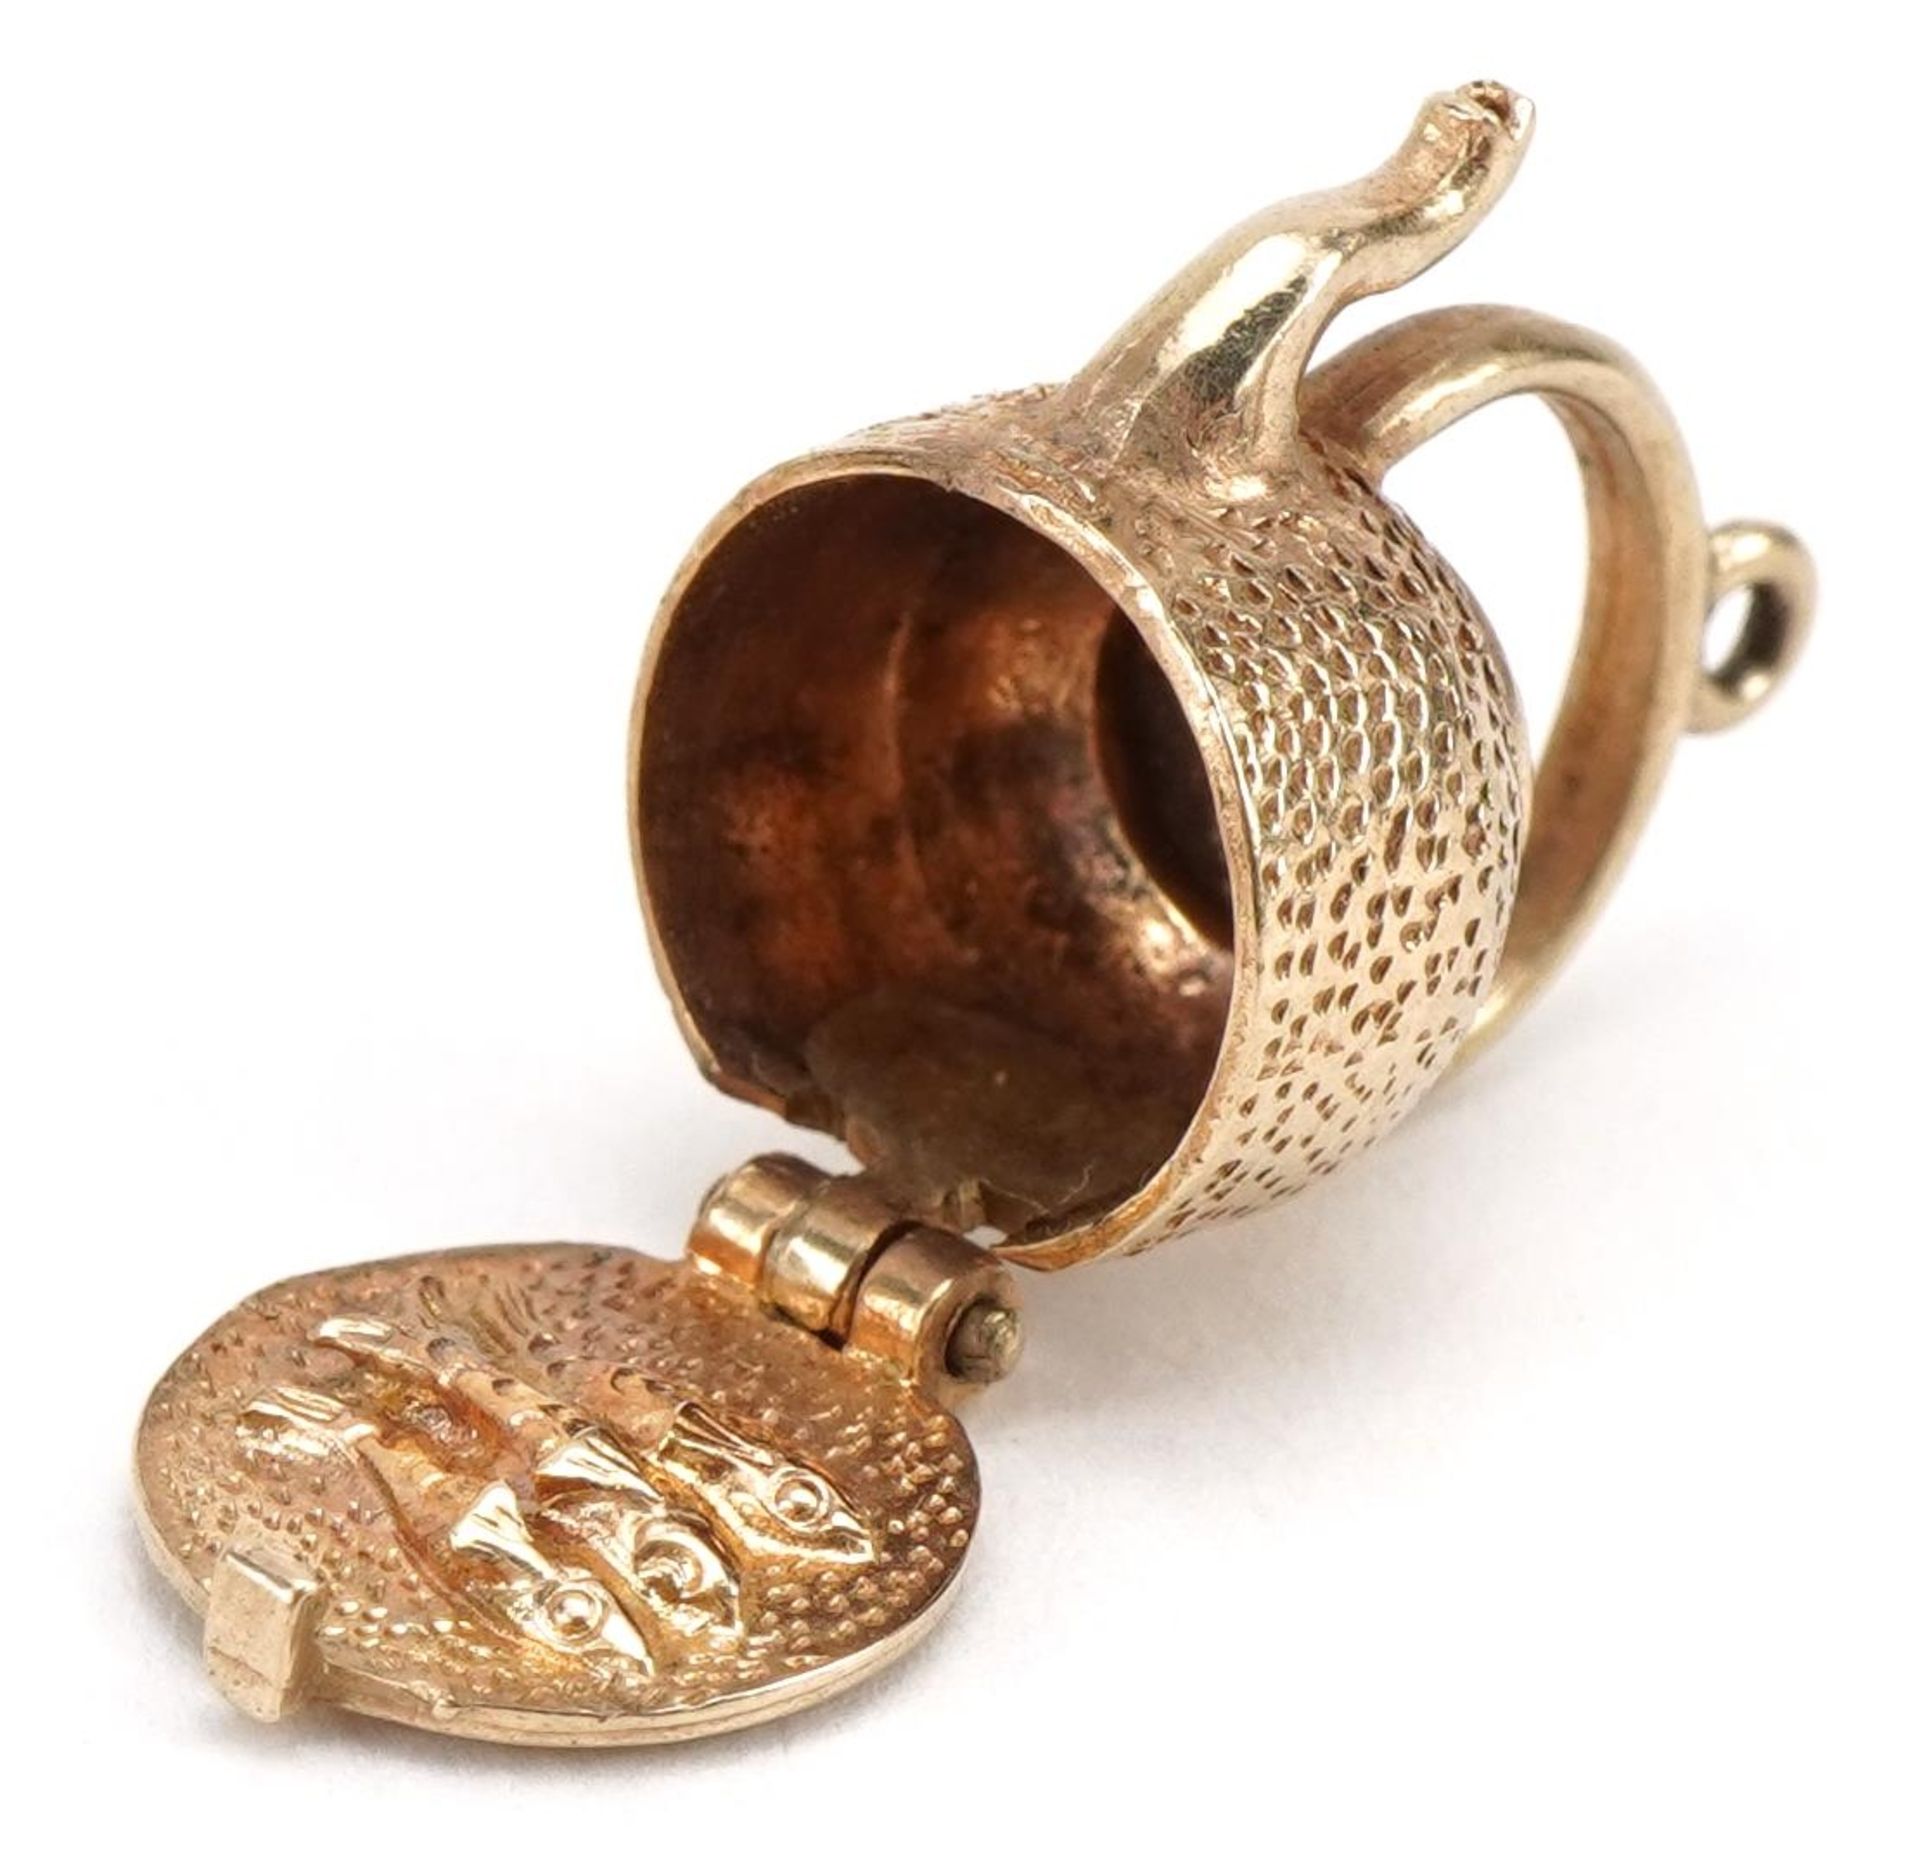 9ct gold kettle charm opening to reveal three fish, 1.8cm high, 3.8g : For further information on - Image 2 of 4